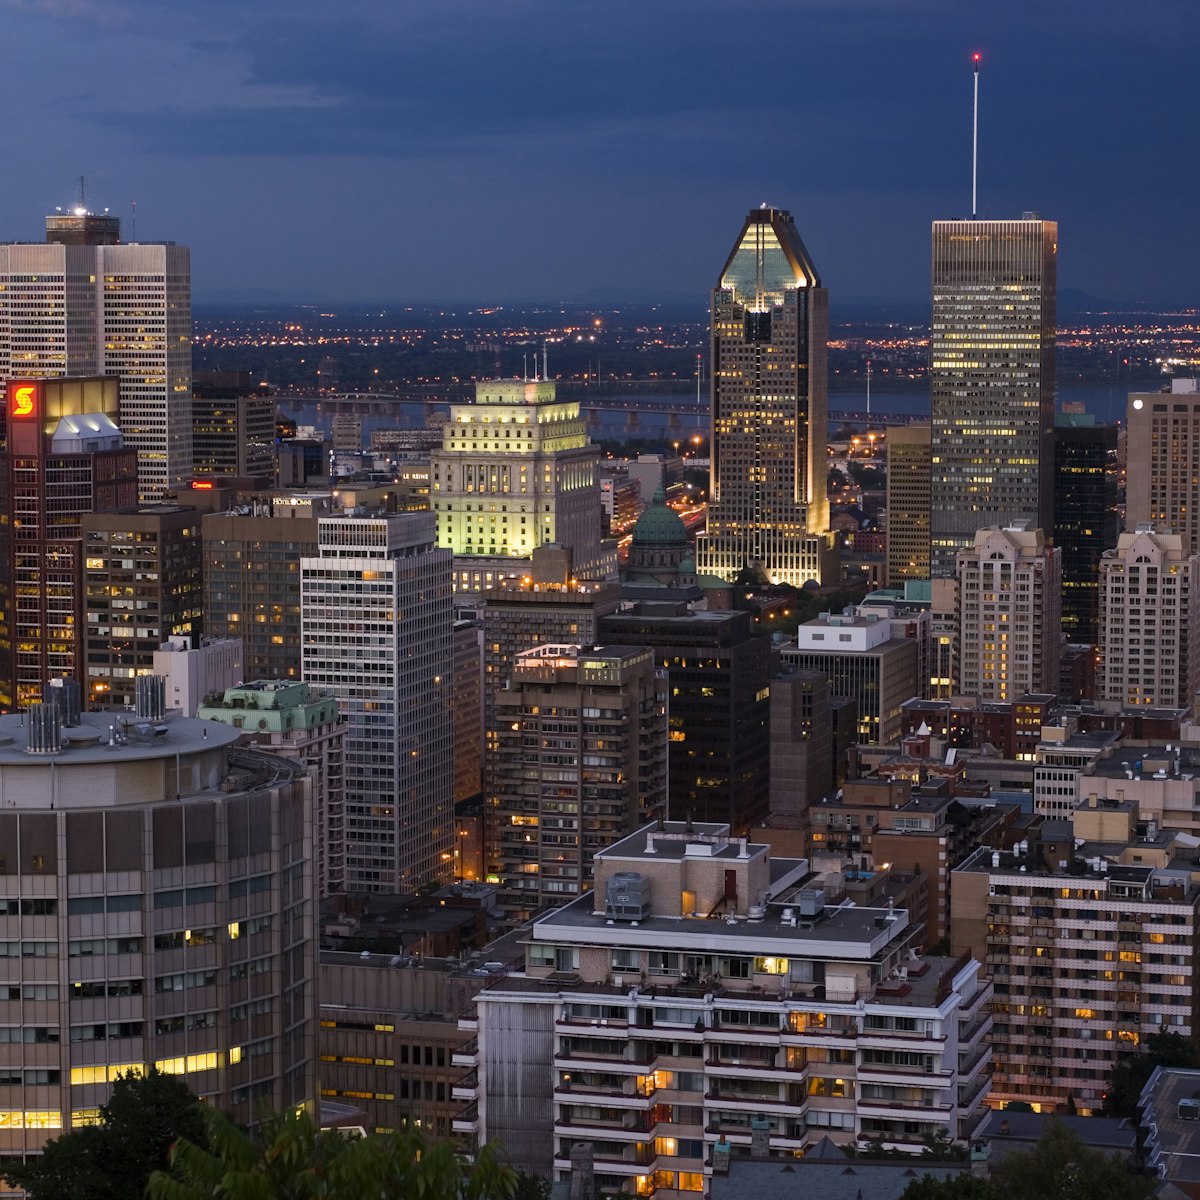 skyline view at twilight from the lookout atop Mt. Royal, Montreal, Quebec, Canada.